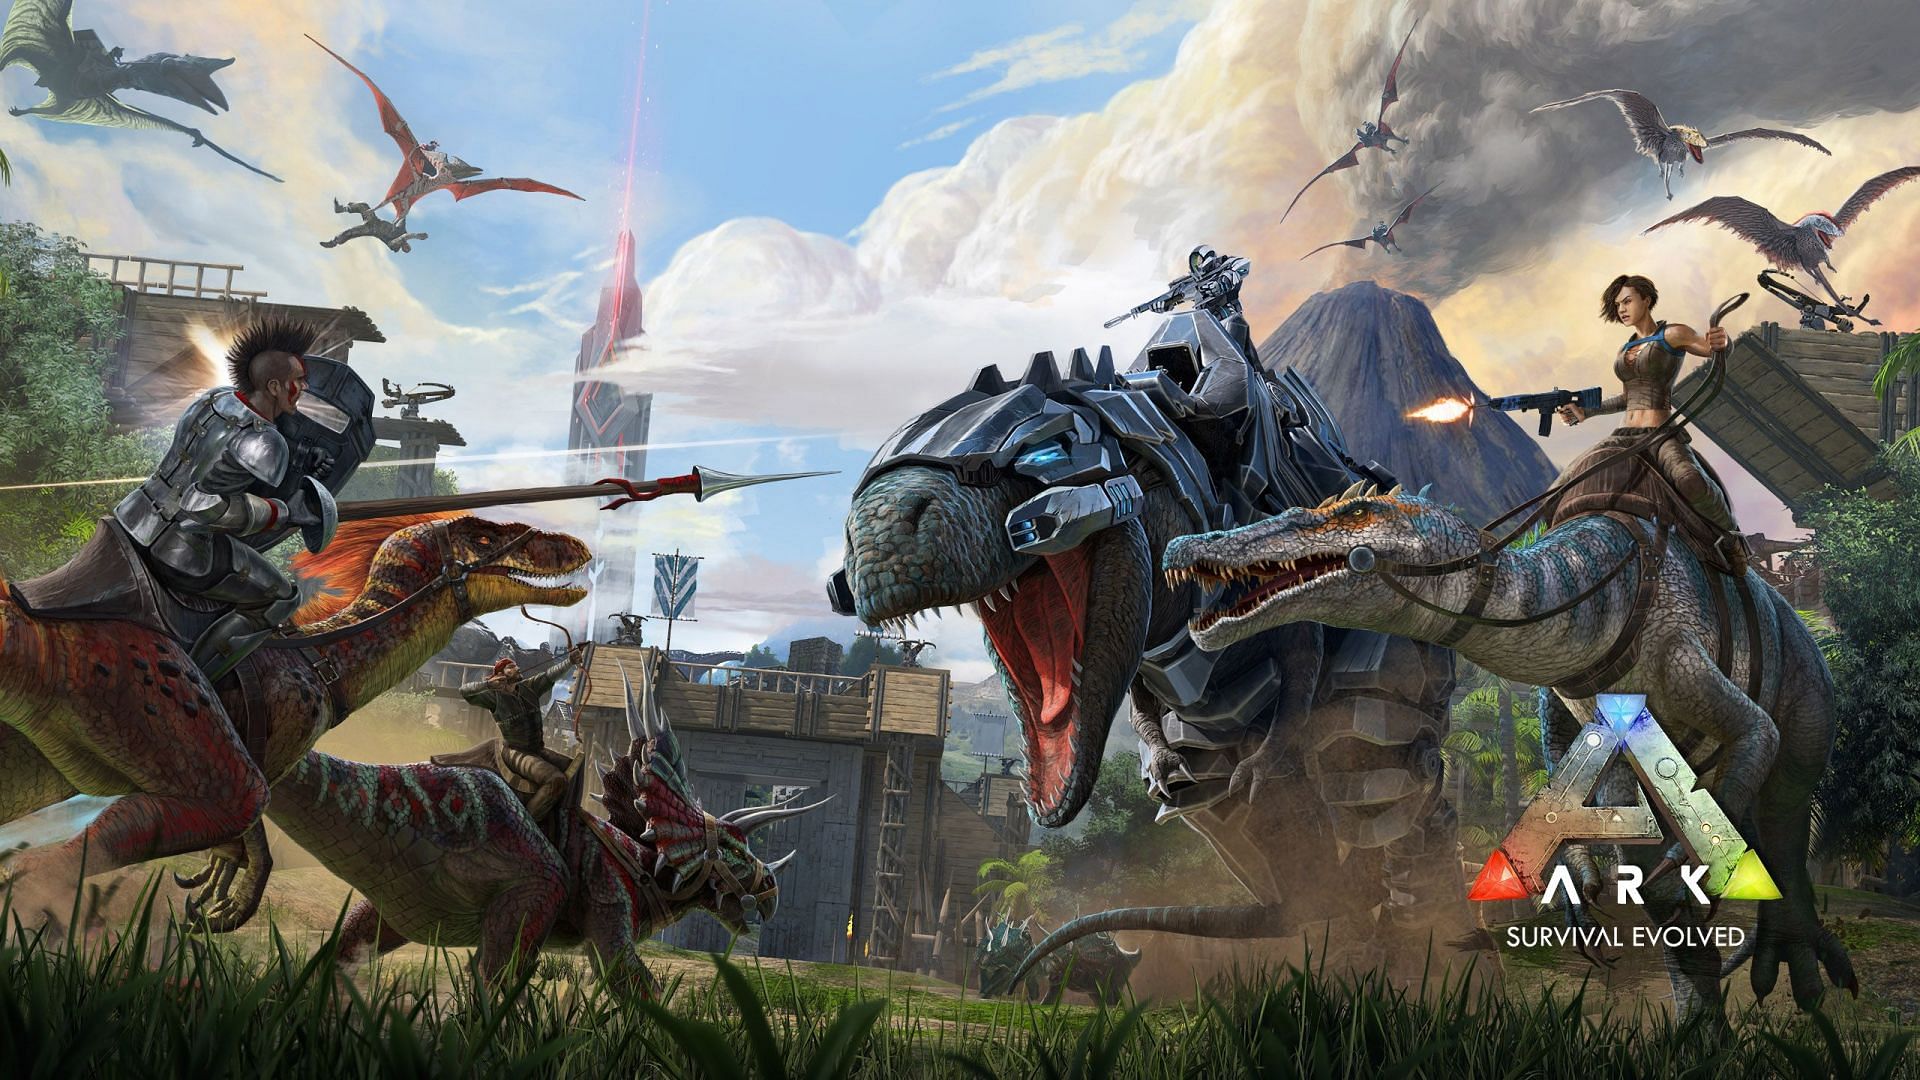 2880x1800  2880x1800 ark survival evolved hd widescreen wallpaper   Coolwallpapersme